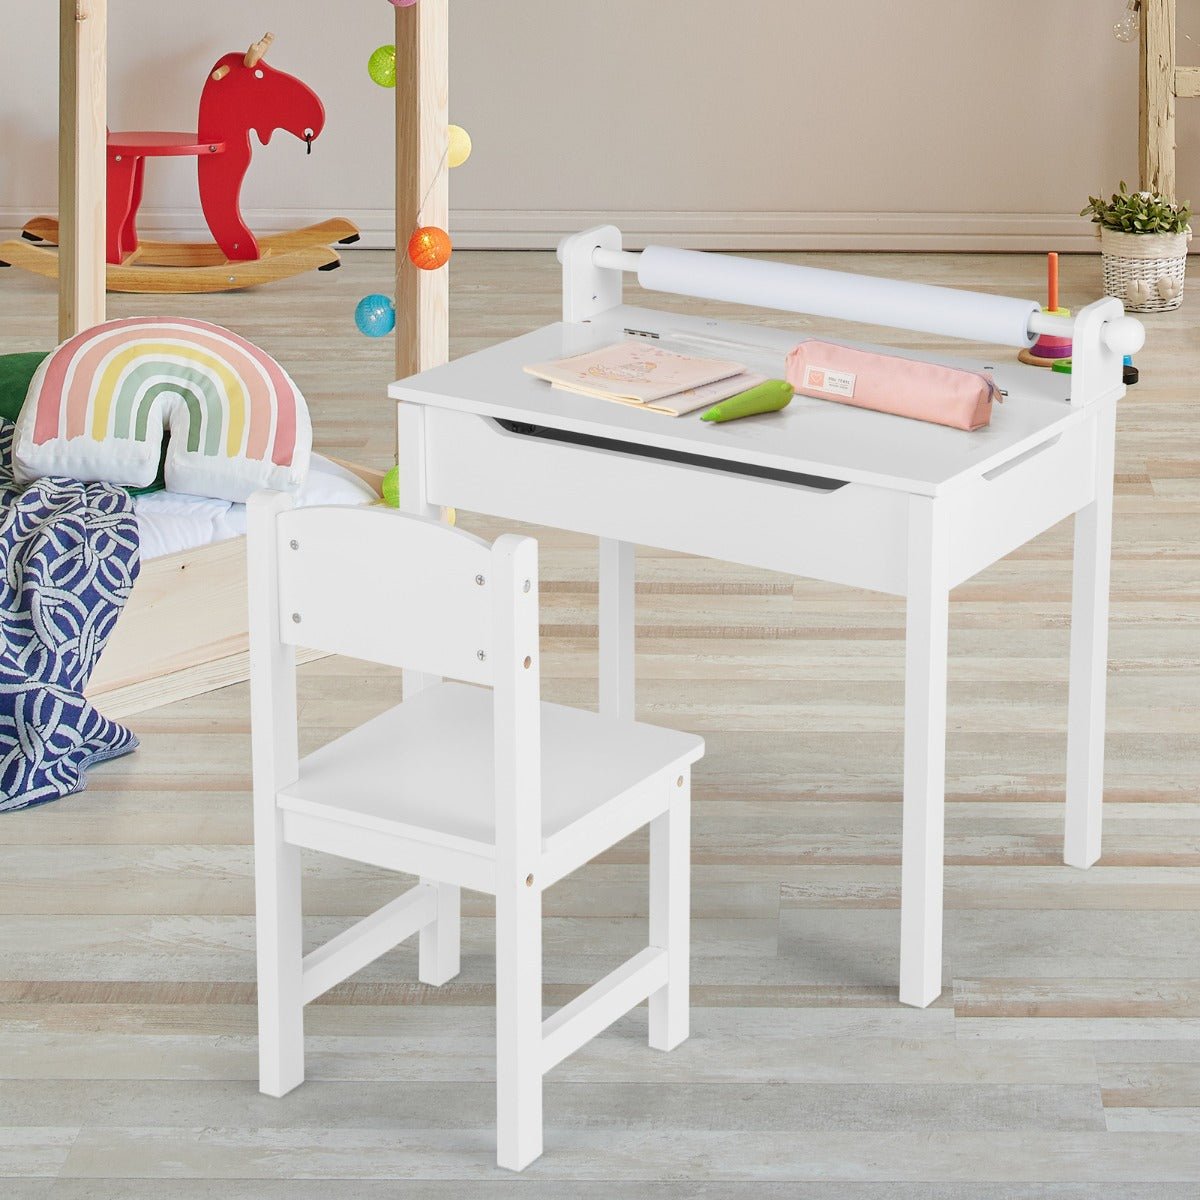 Toddler Art Corner: Table & Chair Set with Paper Roll Holder